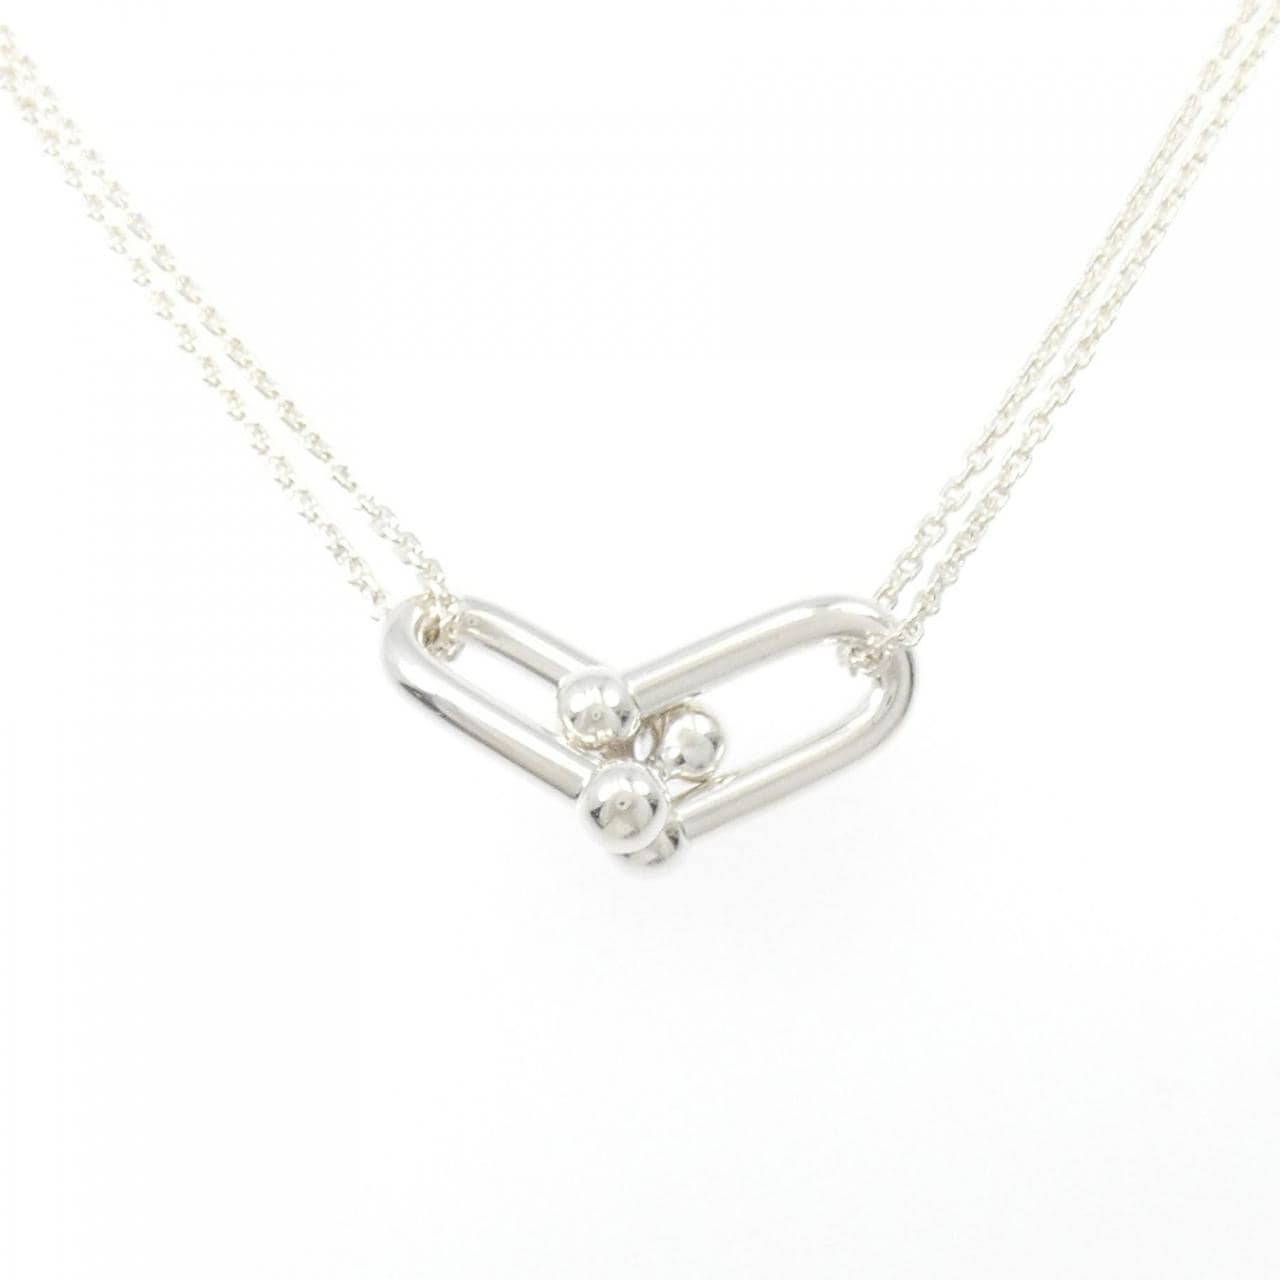 TIFFANY double link necklace